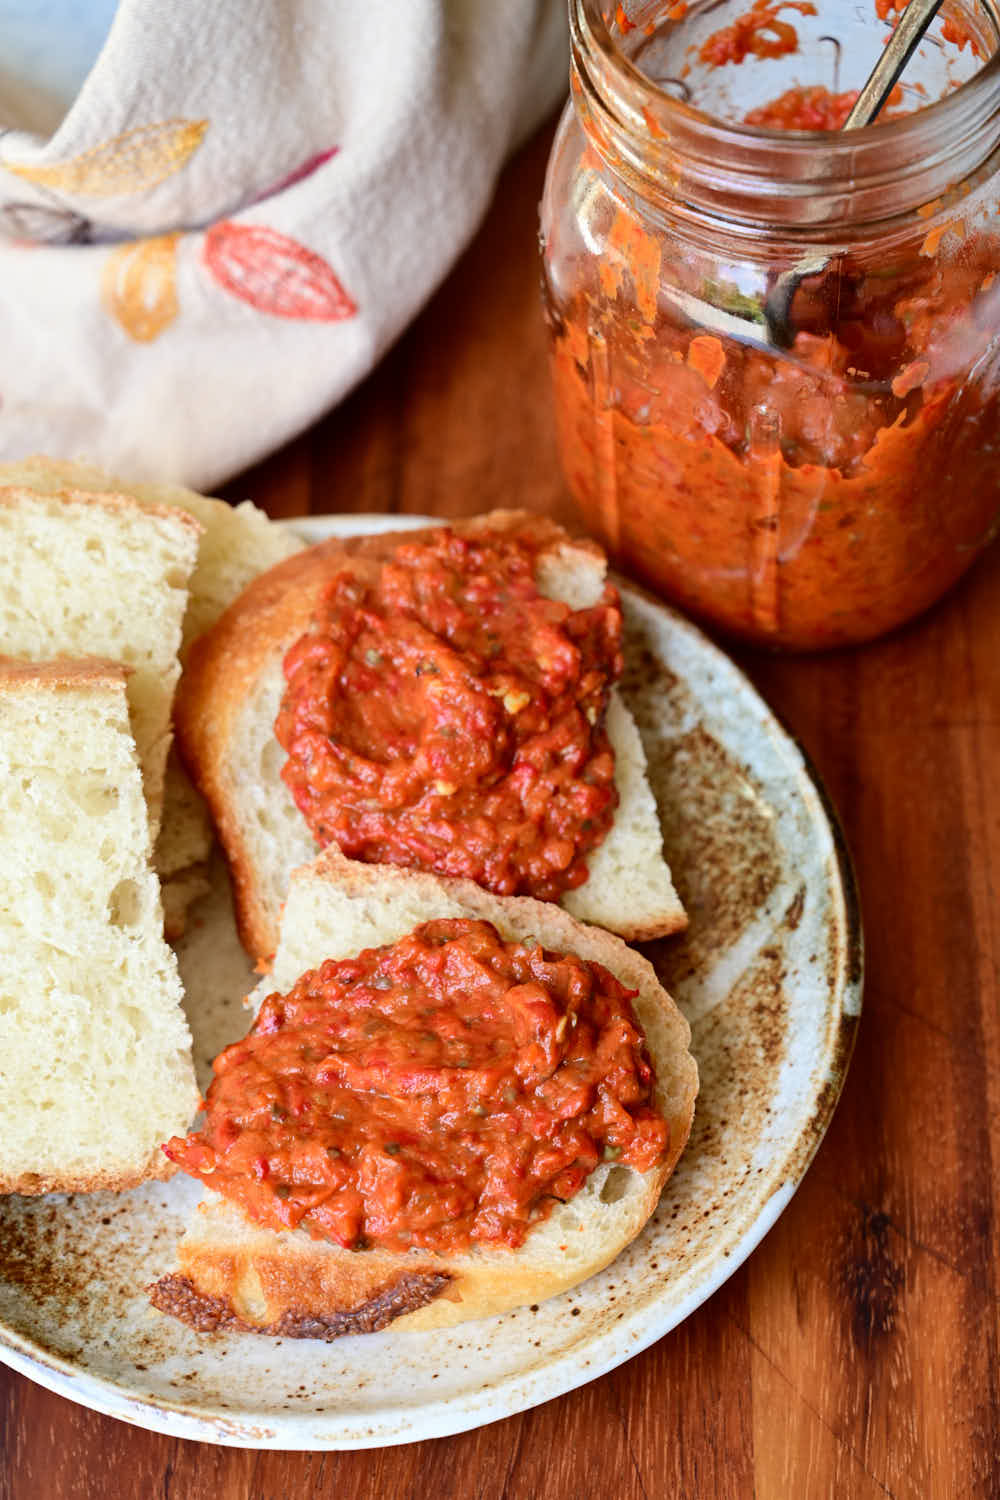 Ajvar, made according to traditional ajvar recipe, served with slices of bread.